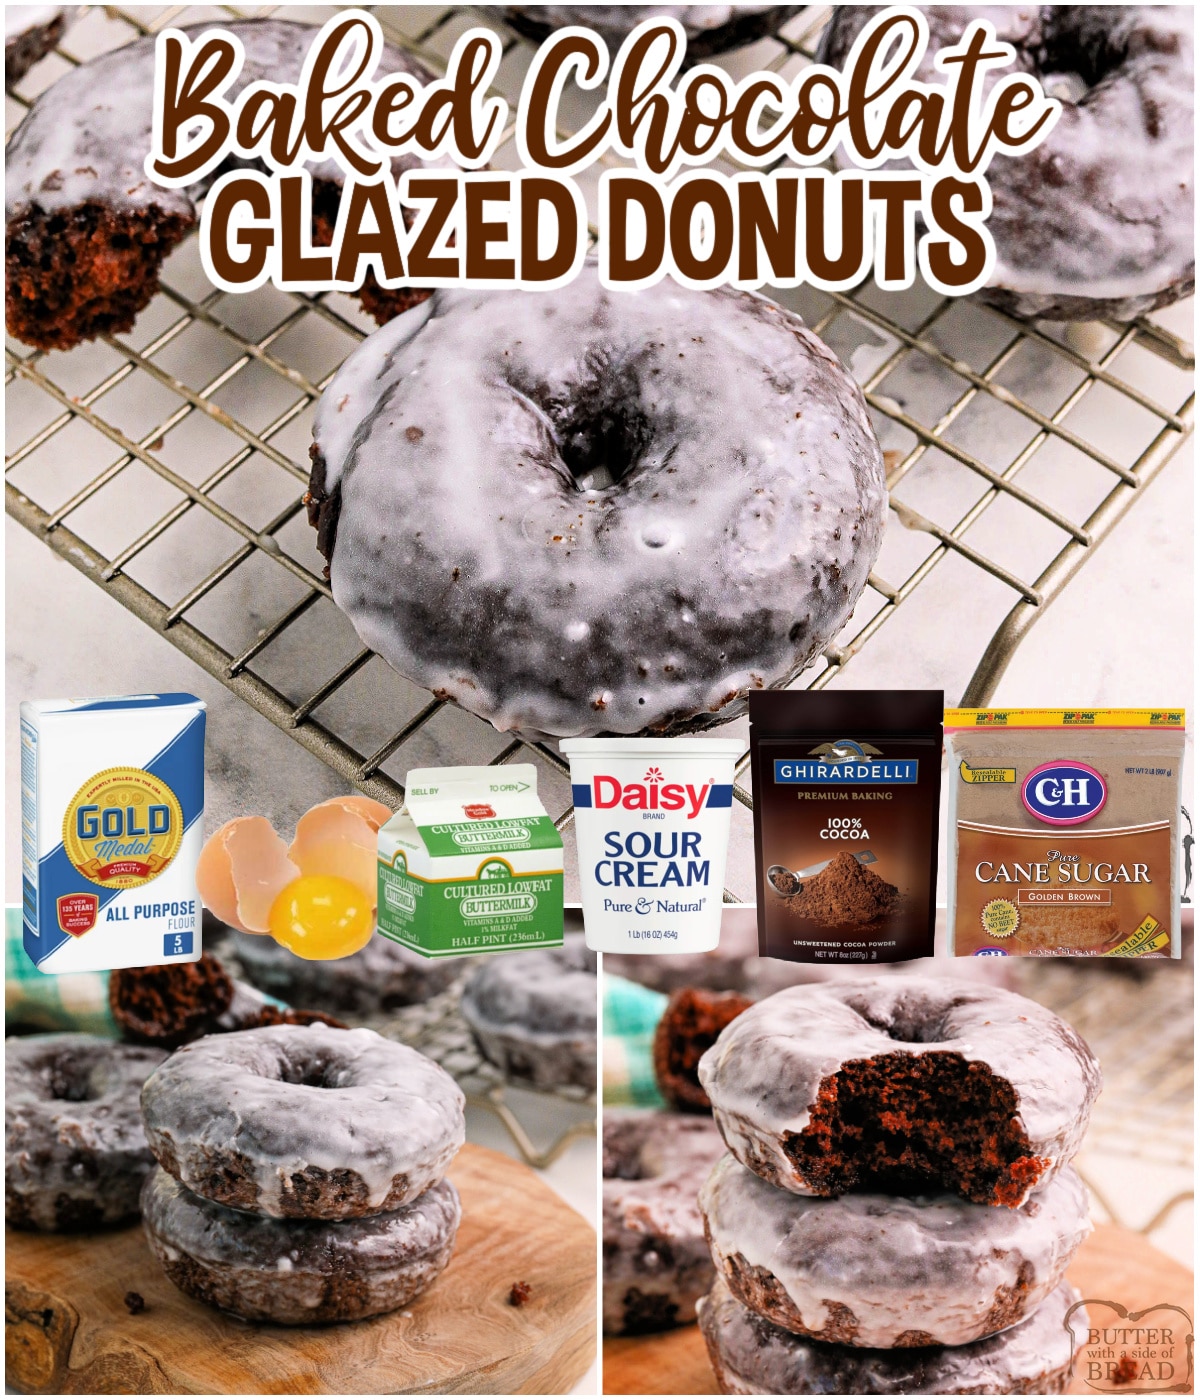 Baked Chocolate Glazed Donuts are made completely from scratch with sour cream, buttermilk, and a simple powdered sugar glaze.